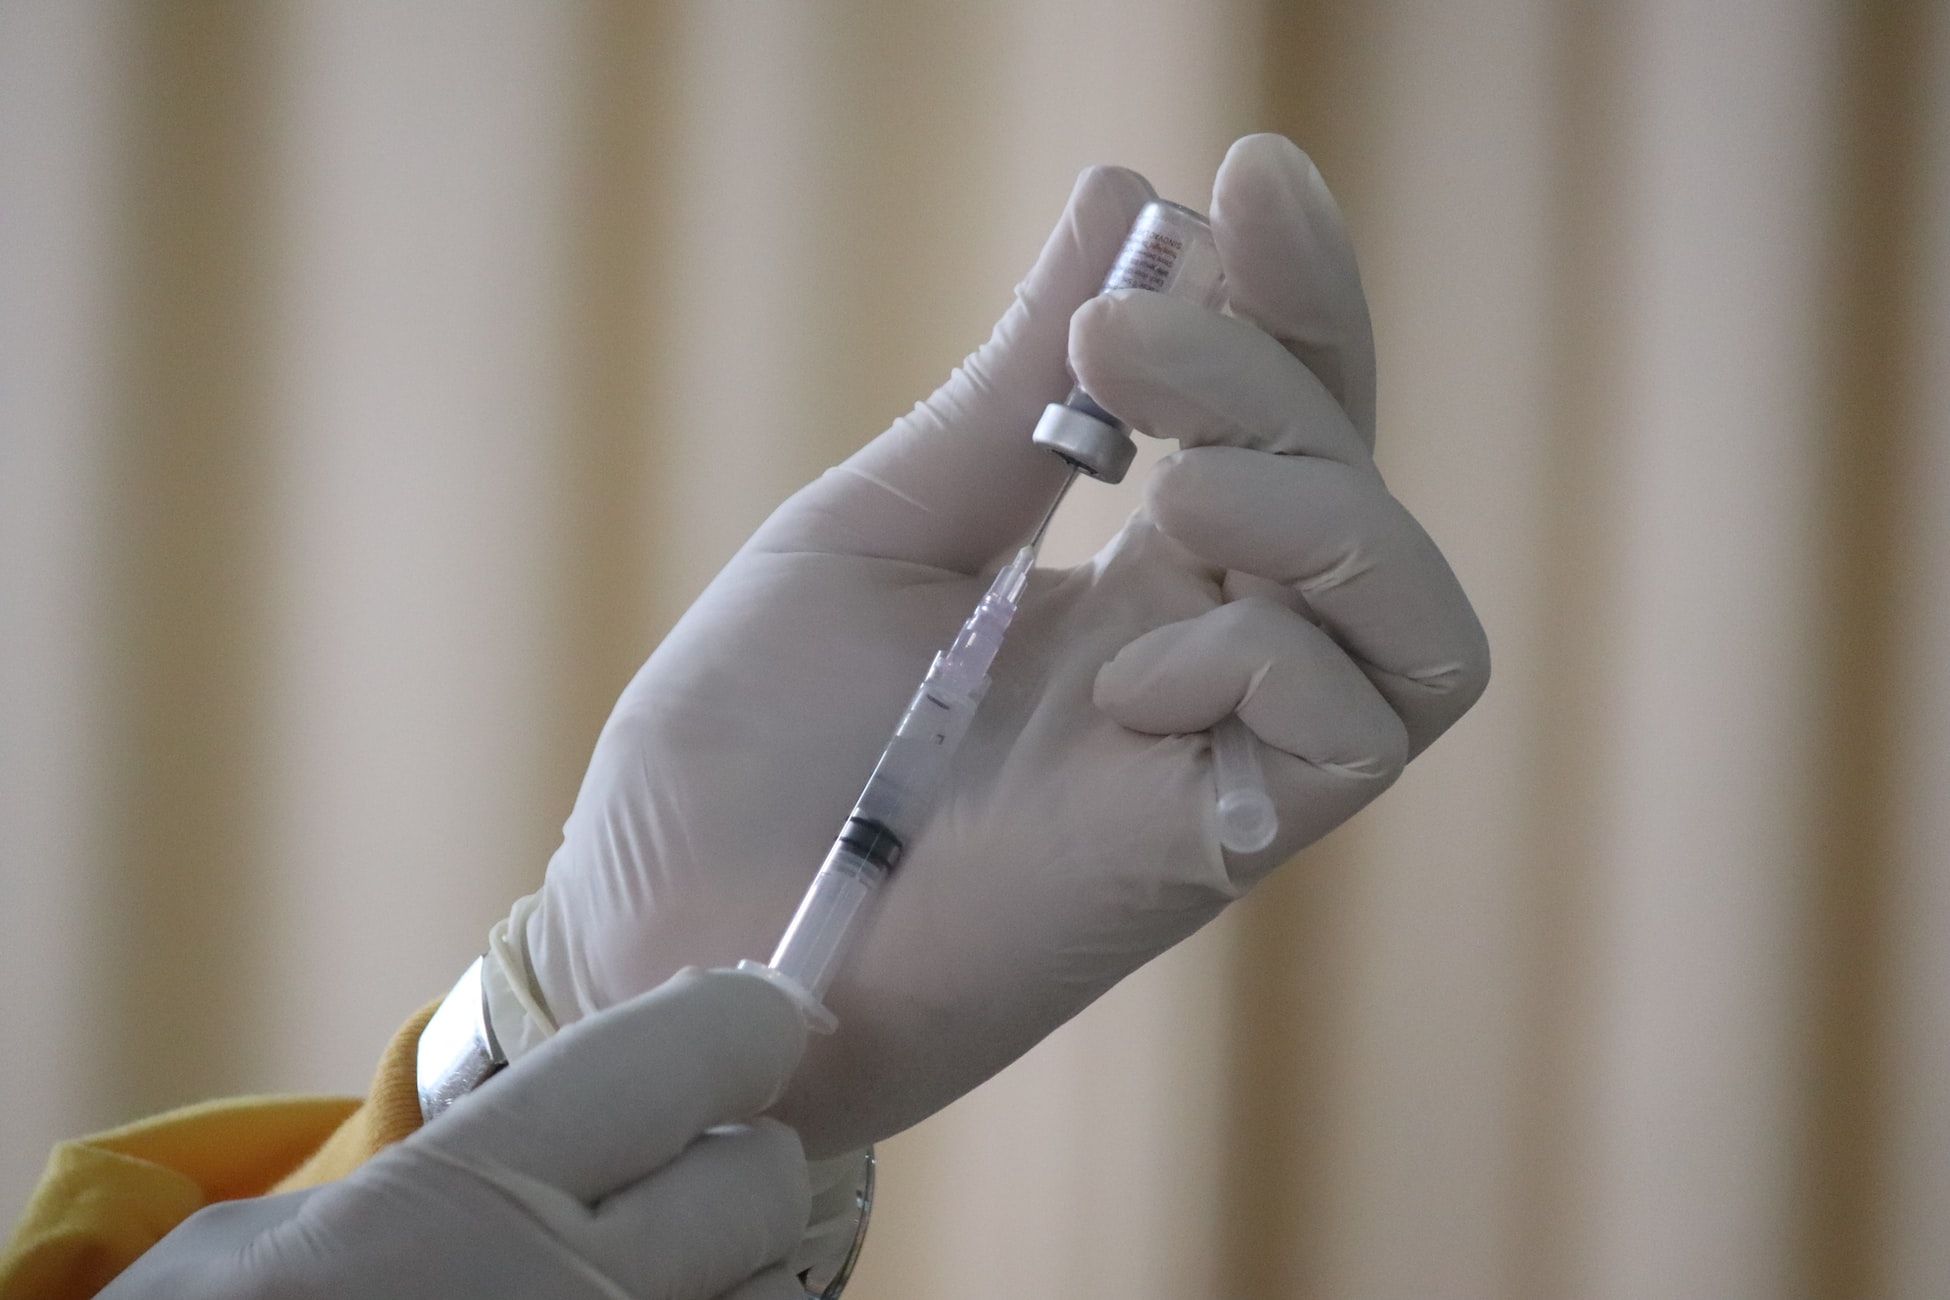 San Francisco to require 35,000 city workers to get vaccinated for COVID-19